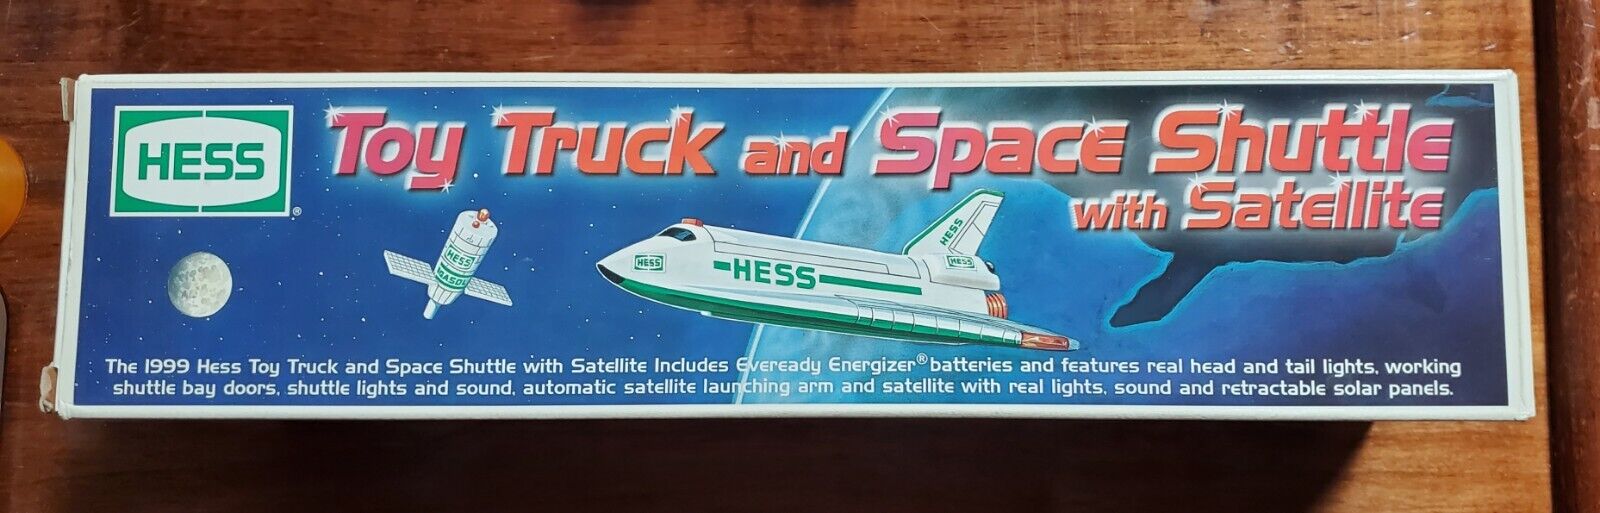 Hess Toy Truck And Space Shuttle With Satellite 1999 New In Box